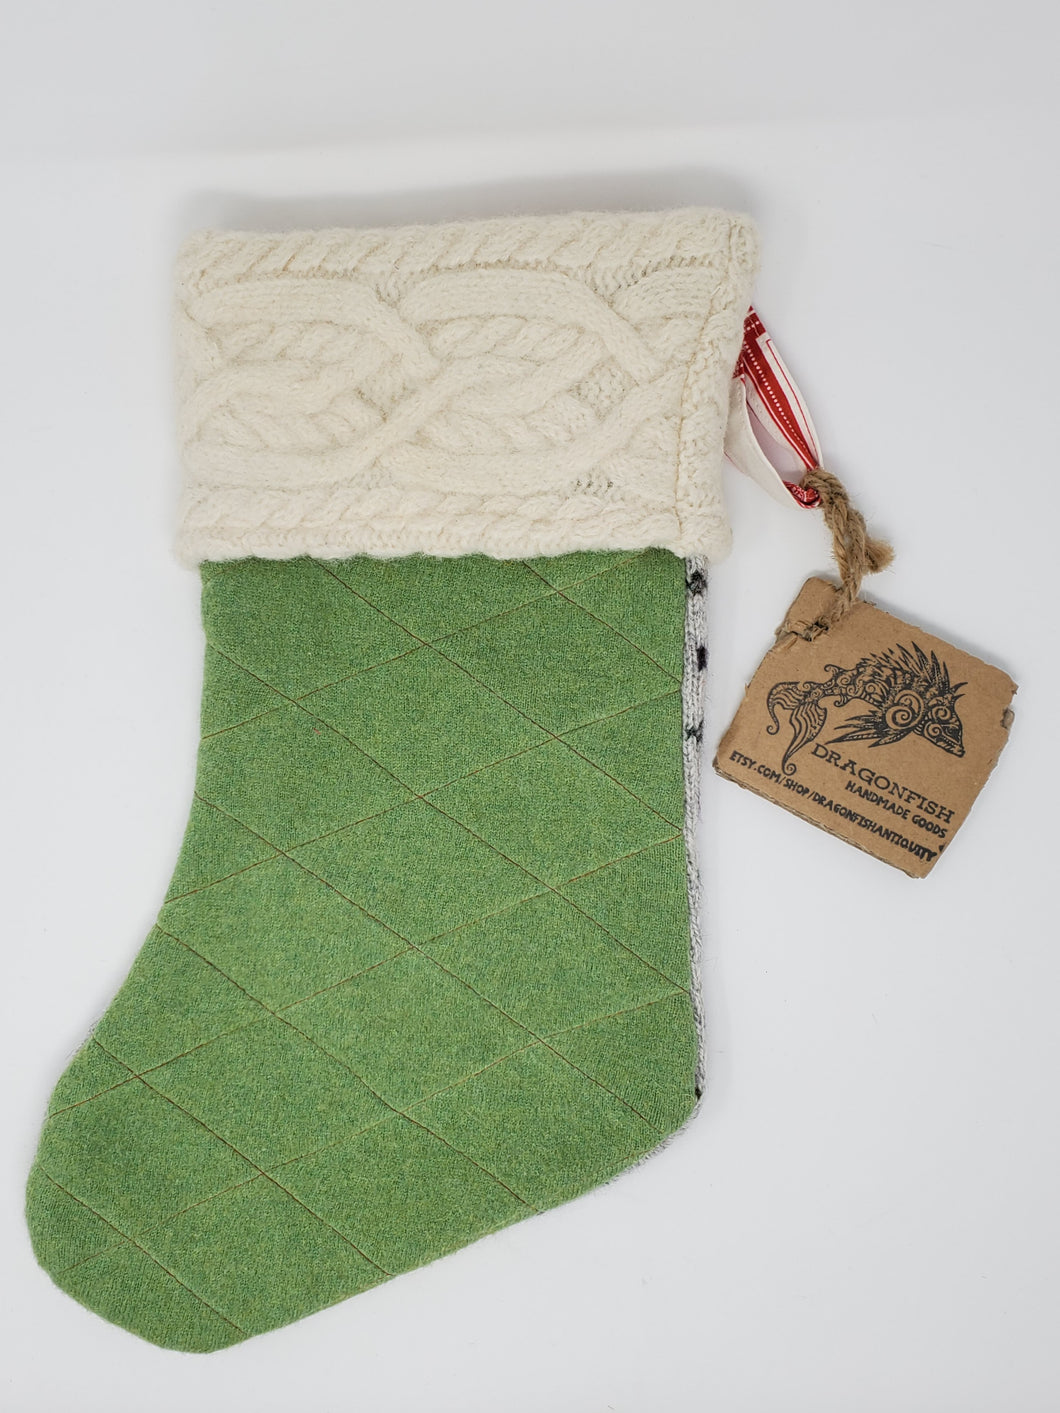 Sweater Fabric Holiday Stocking - Quilted Heirloom Green & Grey Flowers